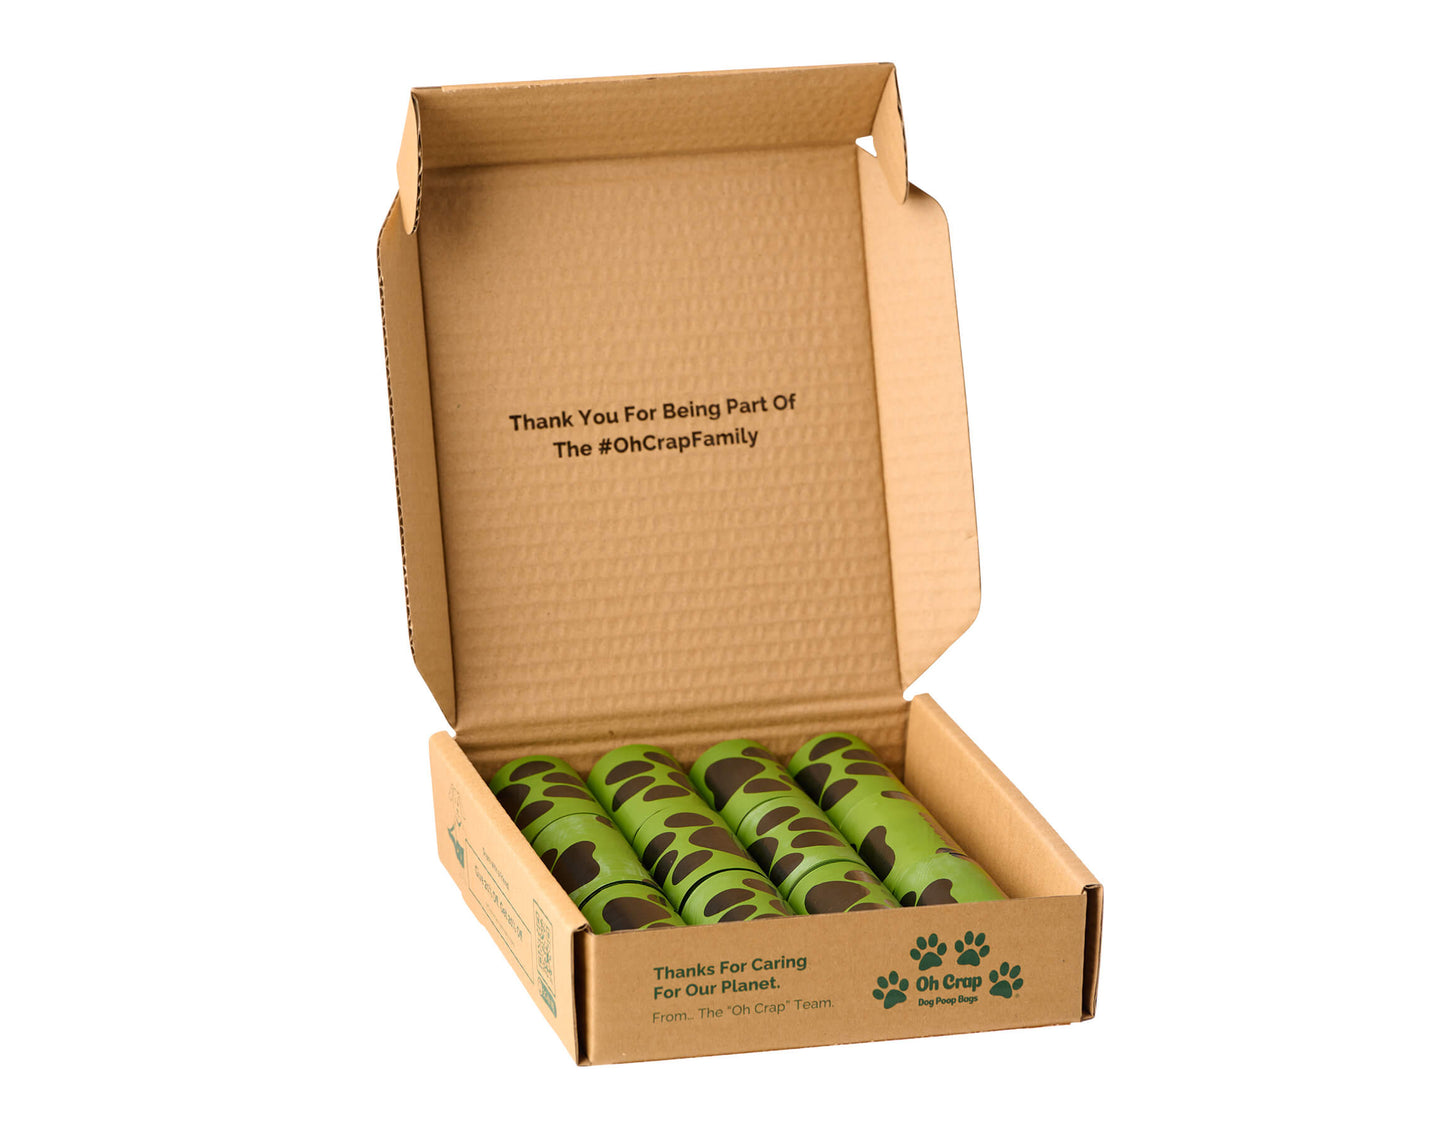 Oh Crap Non Plastic Compostable Biodegradable Dog Poop Bags 6 Month Pack With The Top of the box Open So You Can See The Rolls Inside